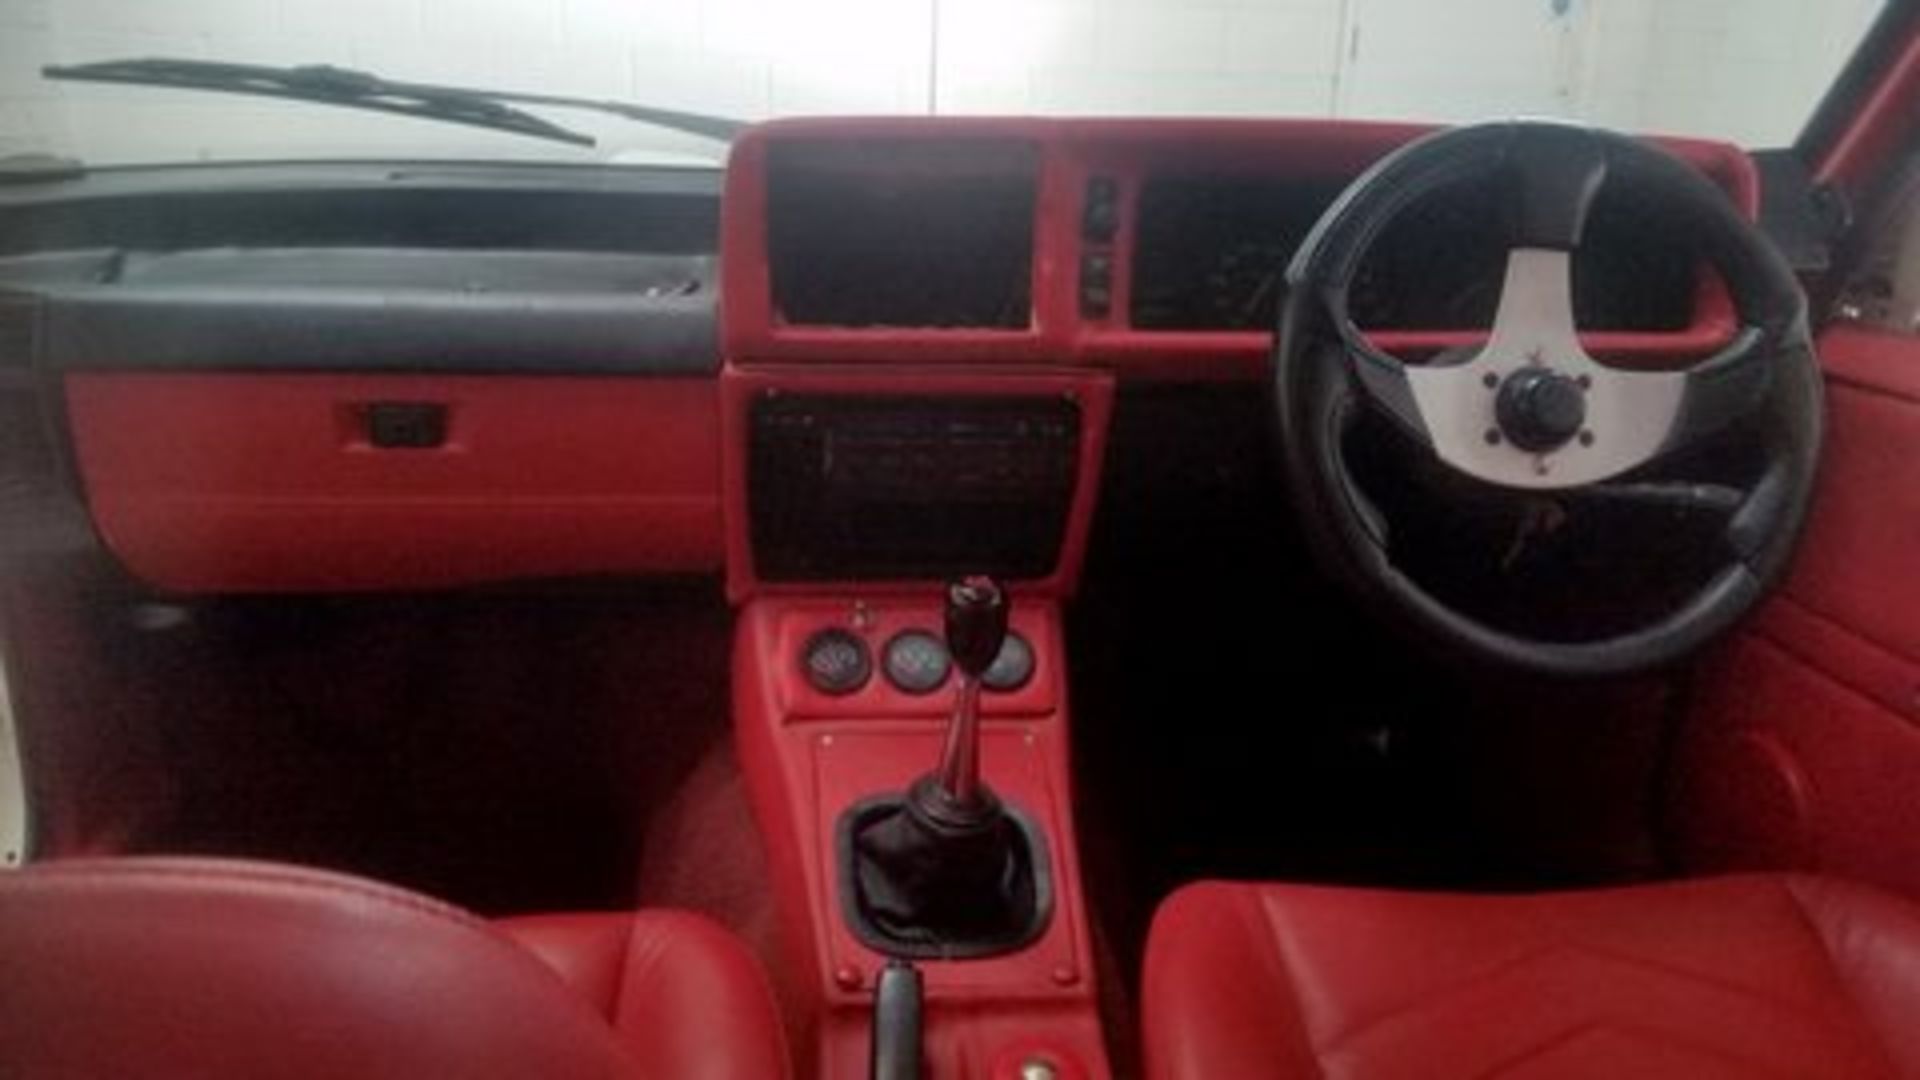 1982 Holden Commodore - Image 6 of 34